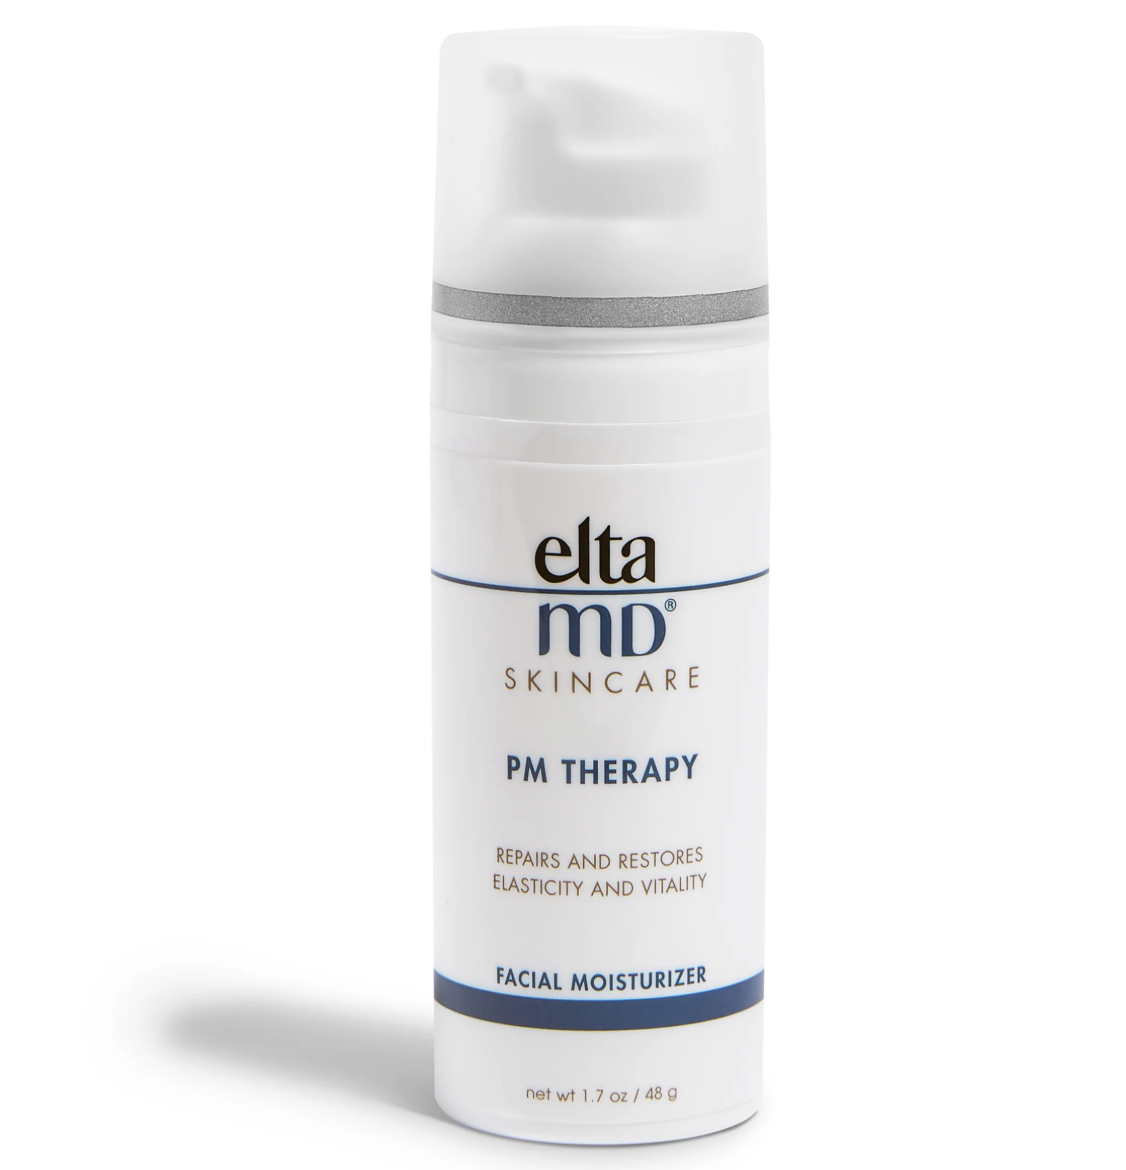 EltaMd PM Therapy Facial Moisturizer